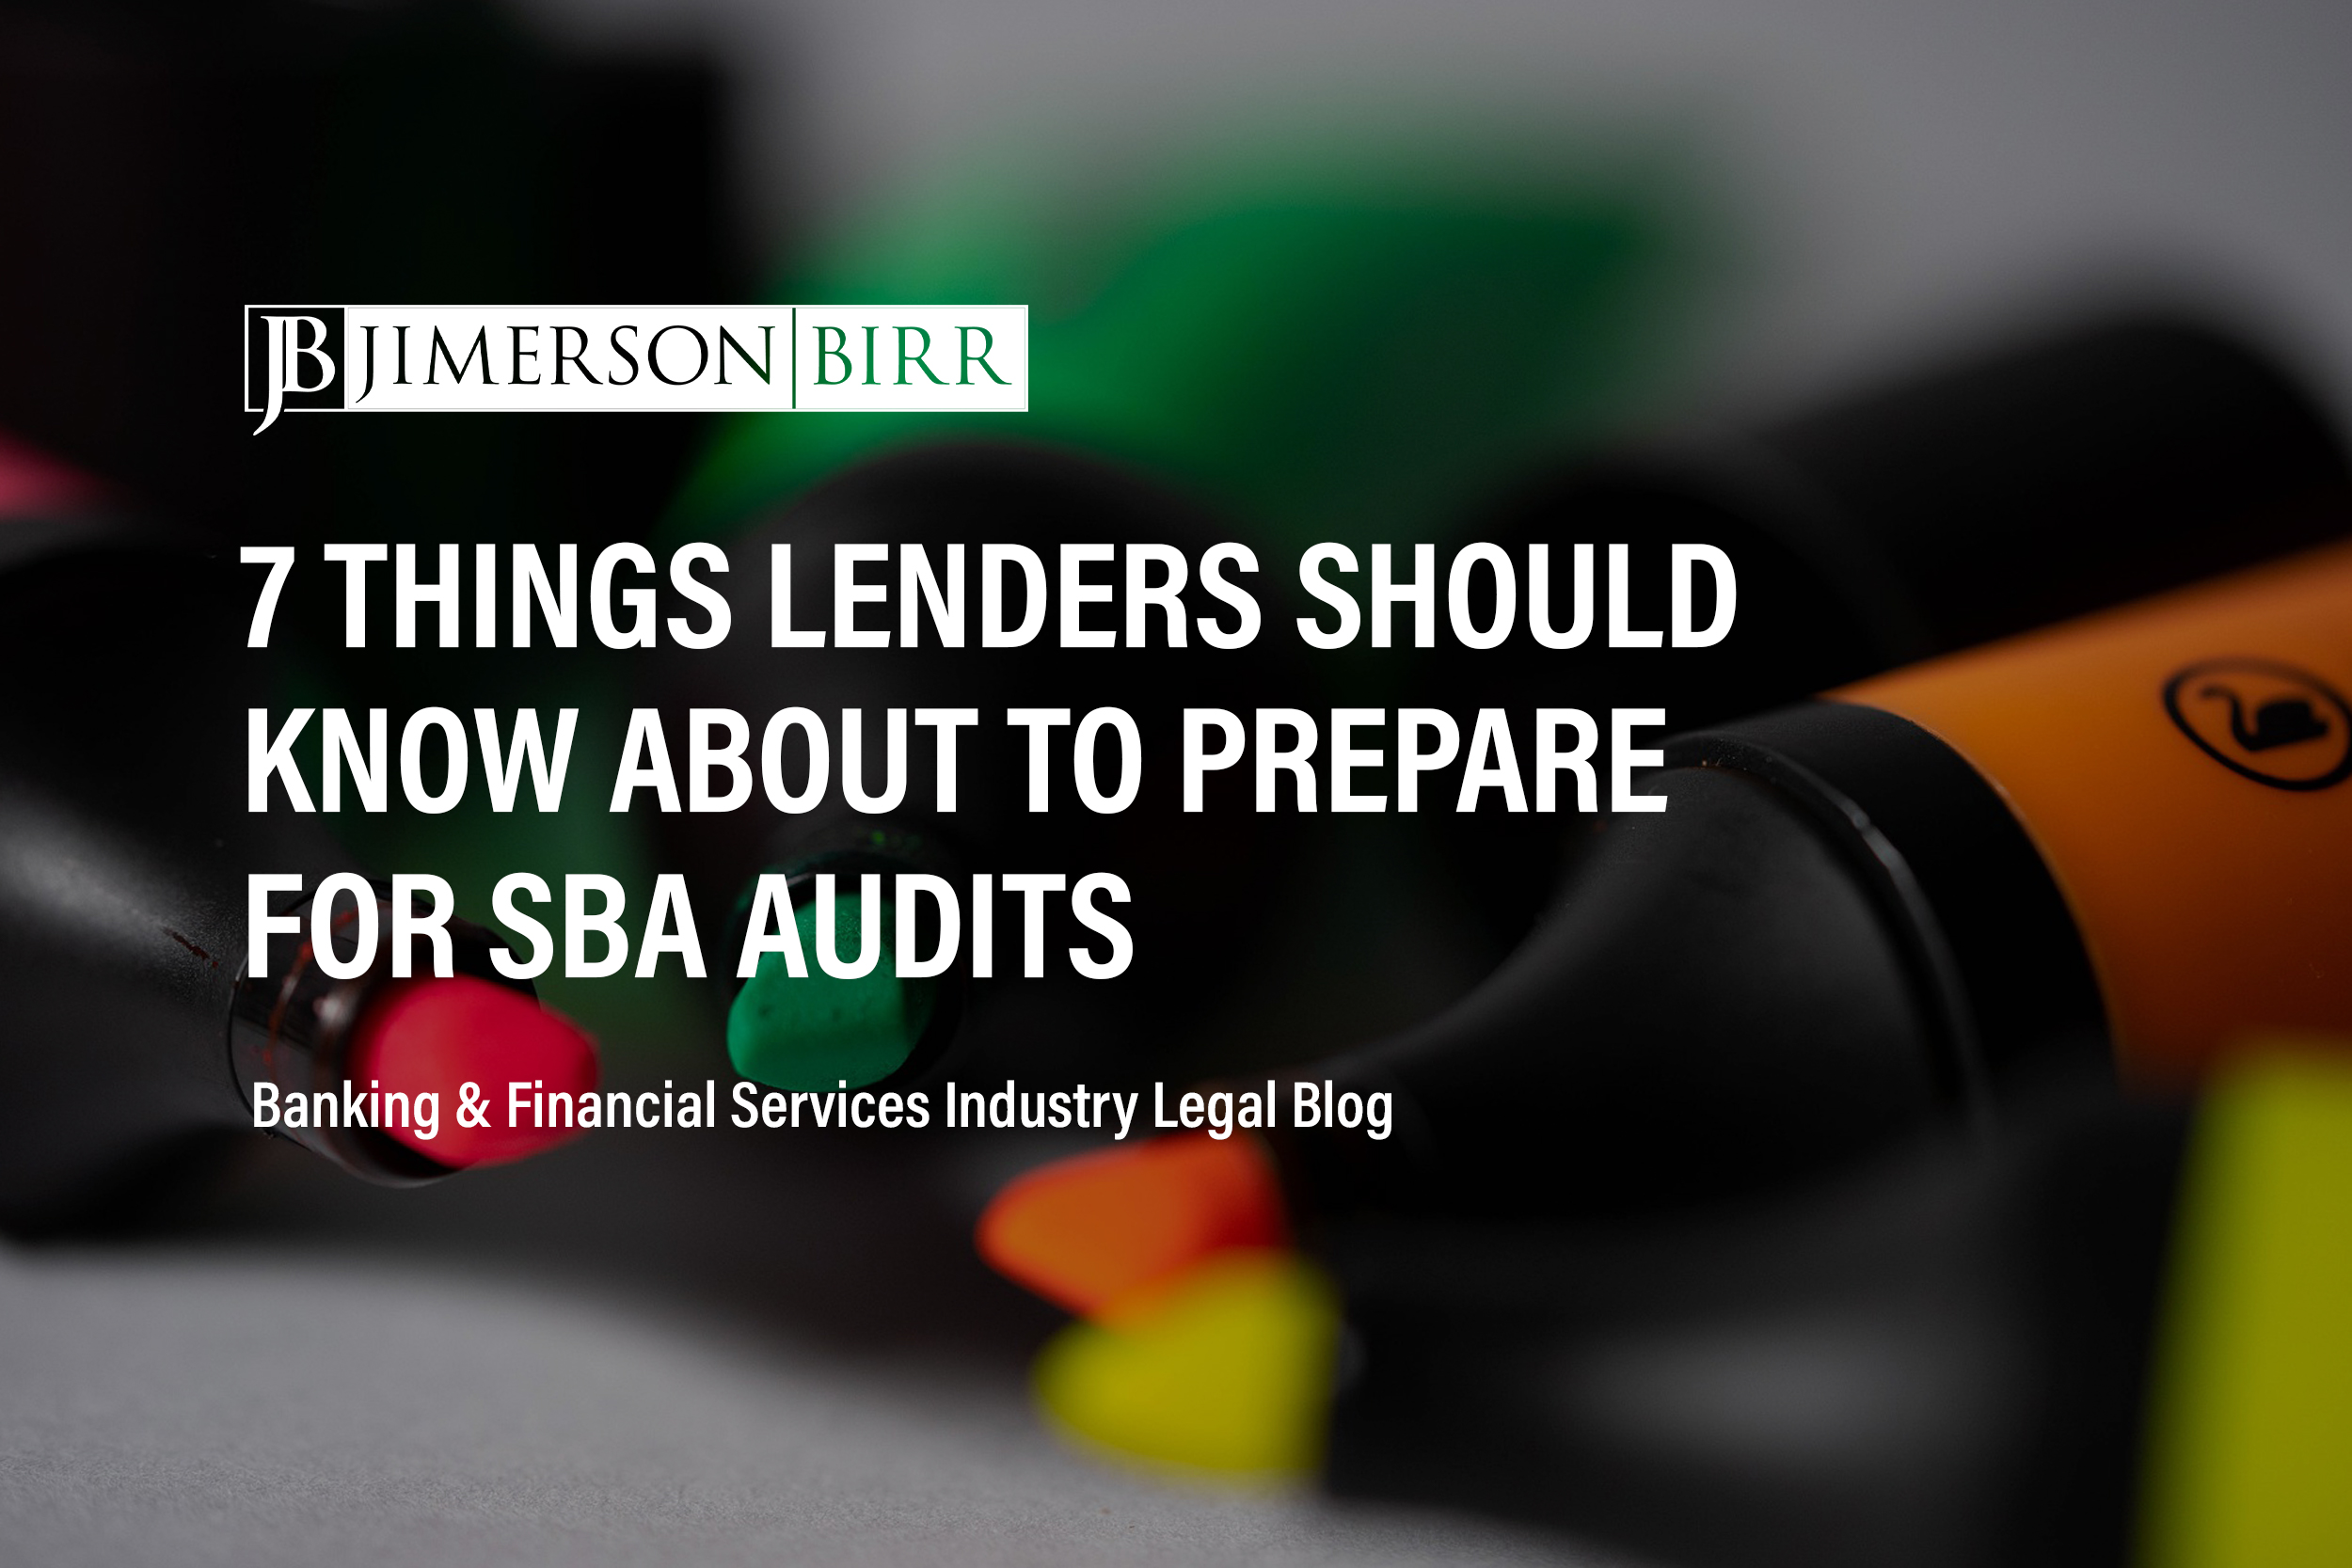 7 Things Lenders Should Know About SBA Audits